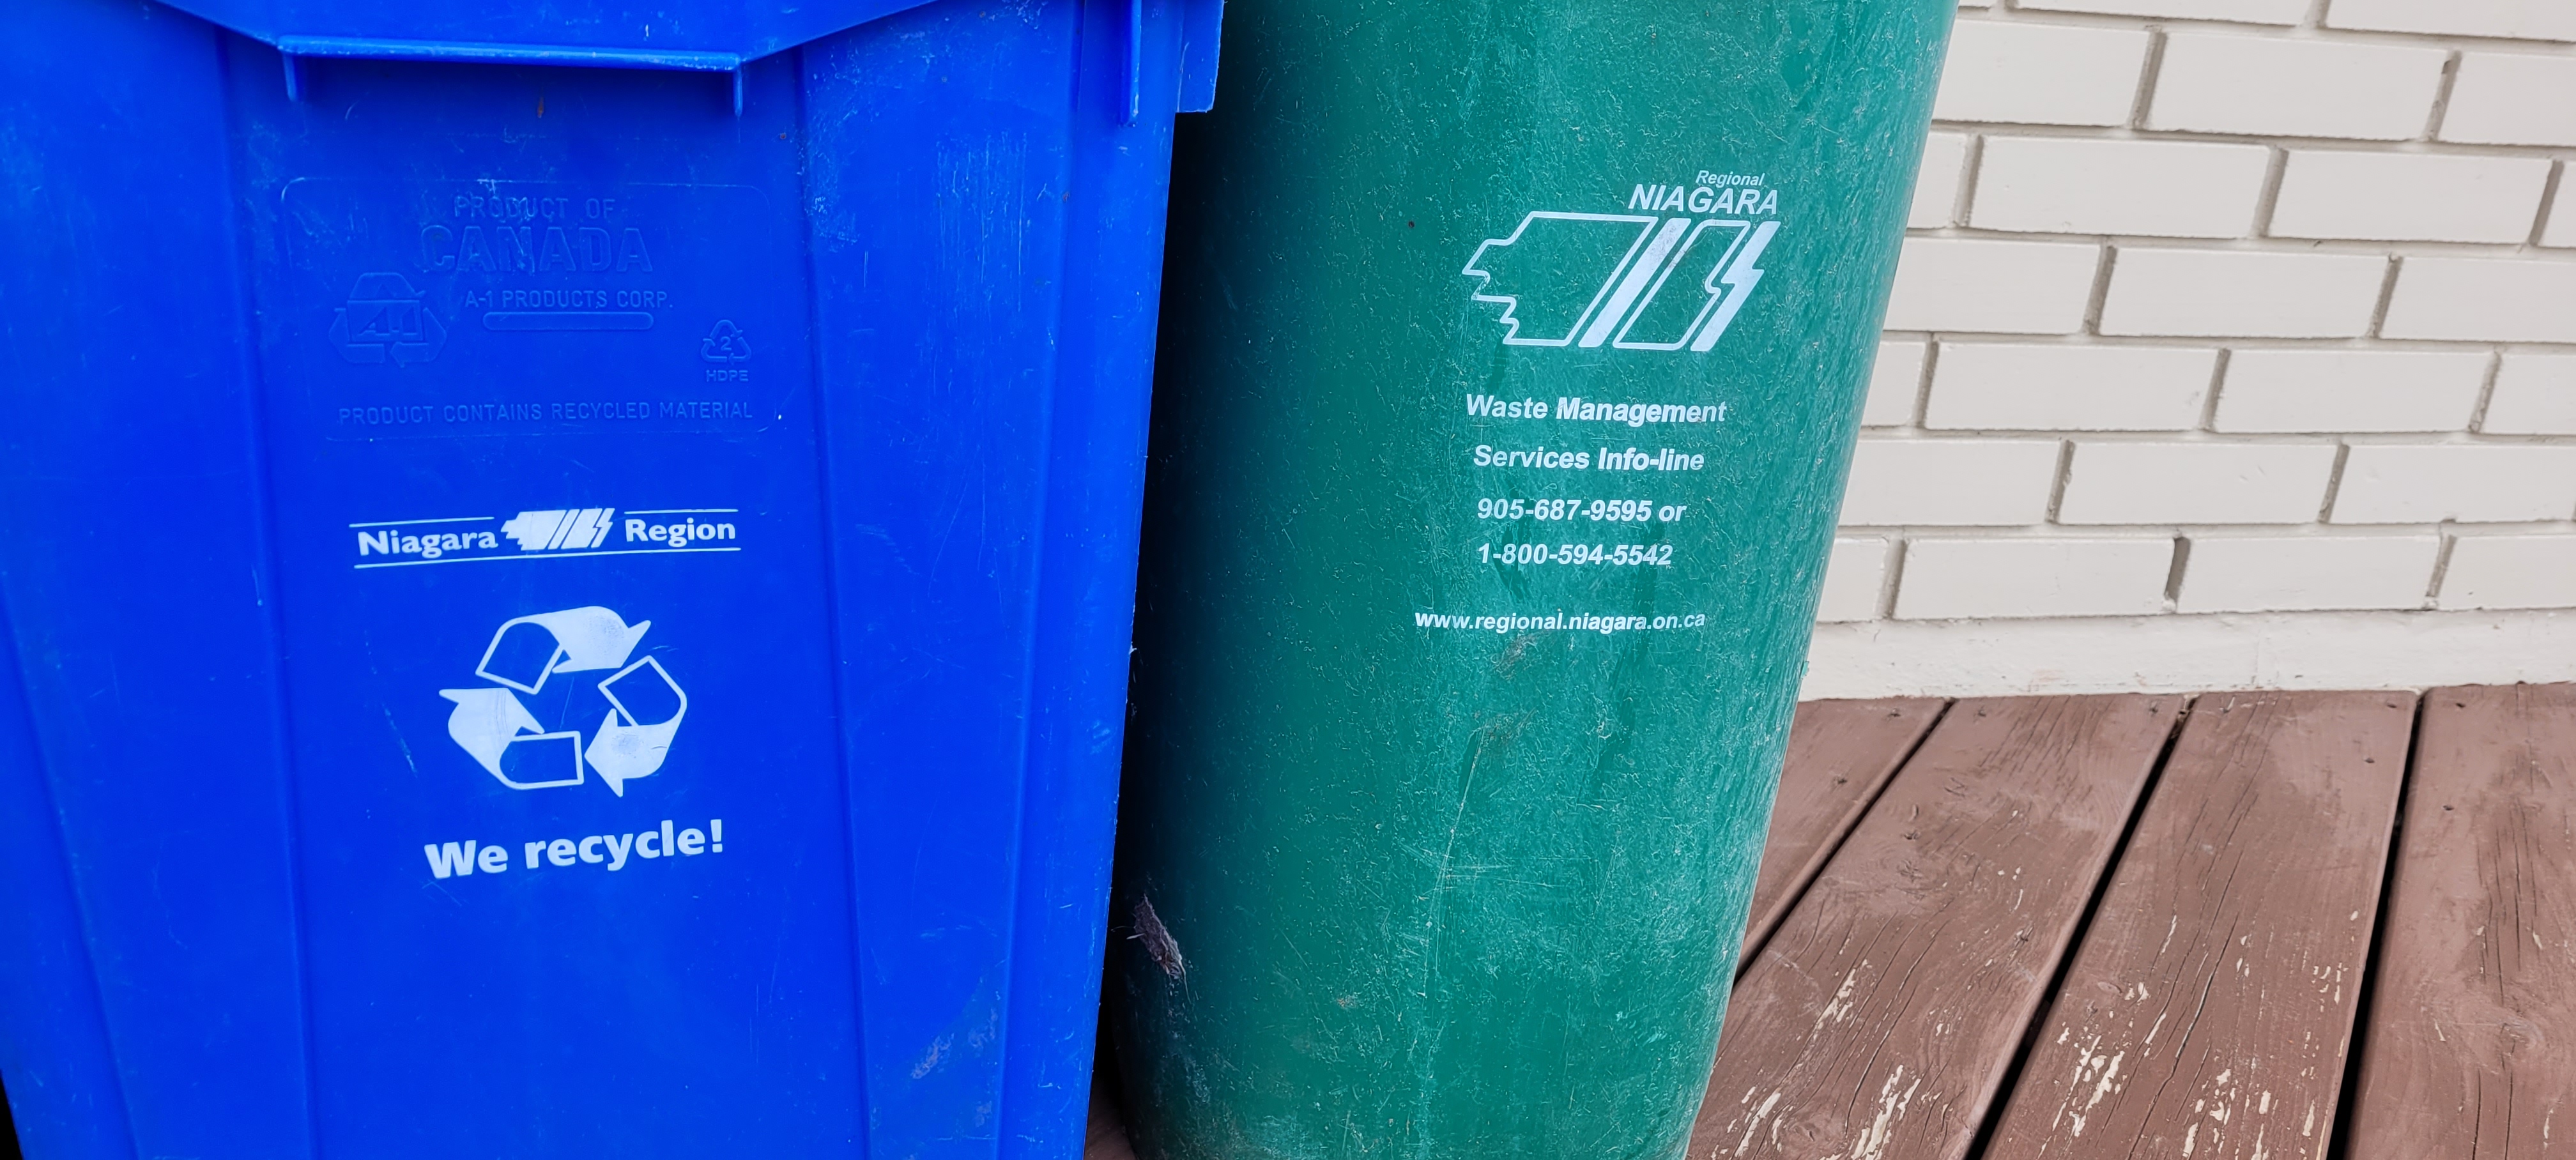 Costs are going up for various waste services in Niagara